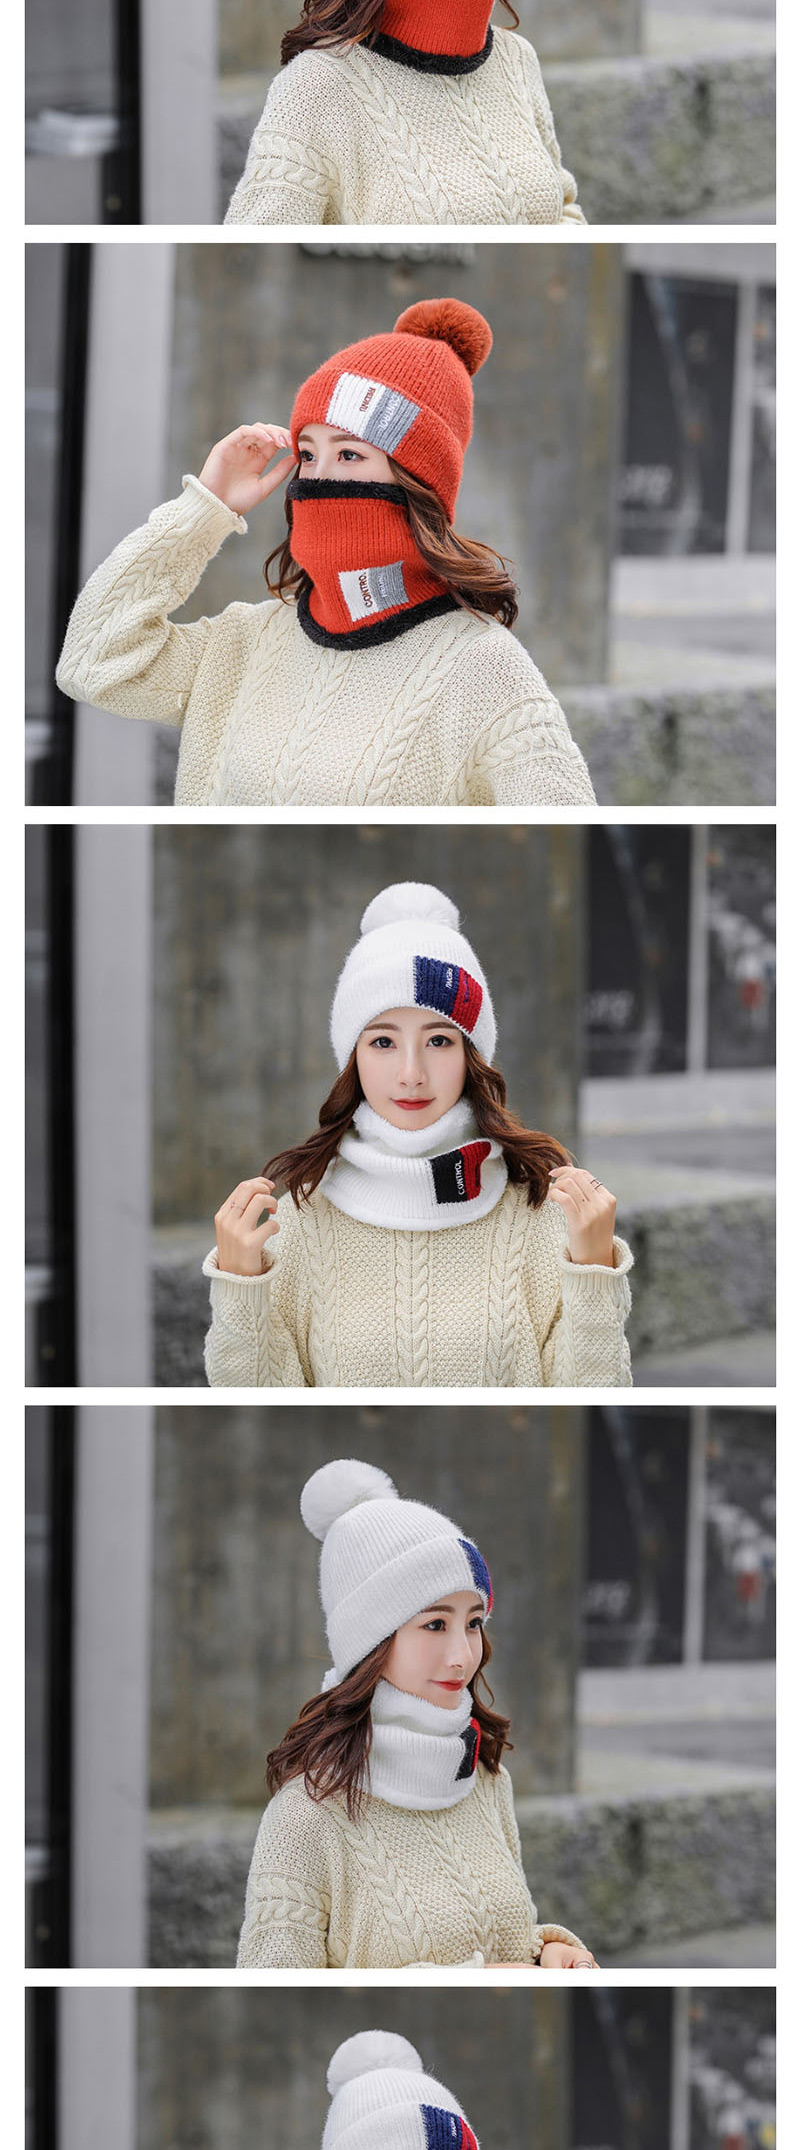 Fashion Red Plus Velvet Color Matching Hat Bib Two-piece,Knitting Wool Hats